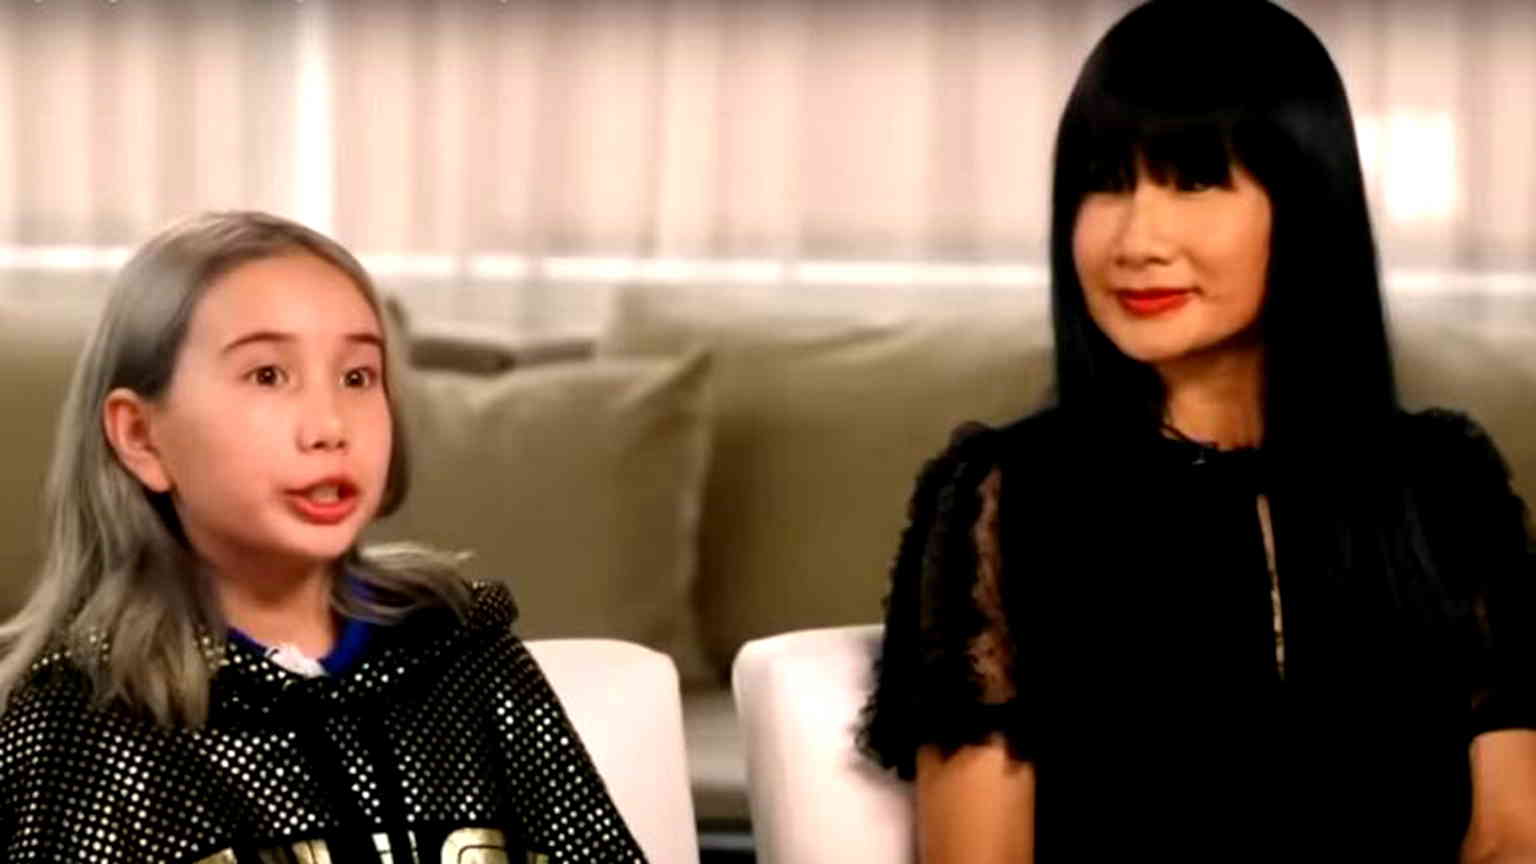 Lil Tay poised for potential comeback after mother claims custody battle win